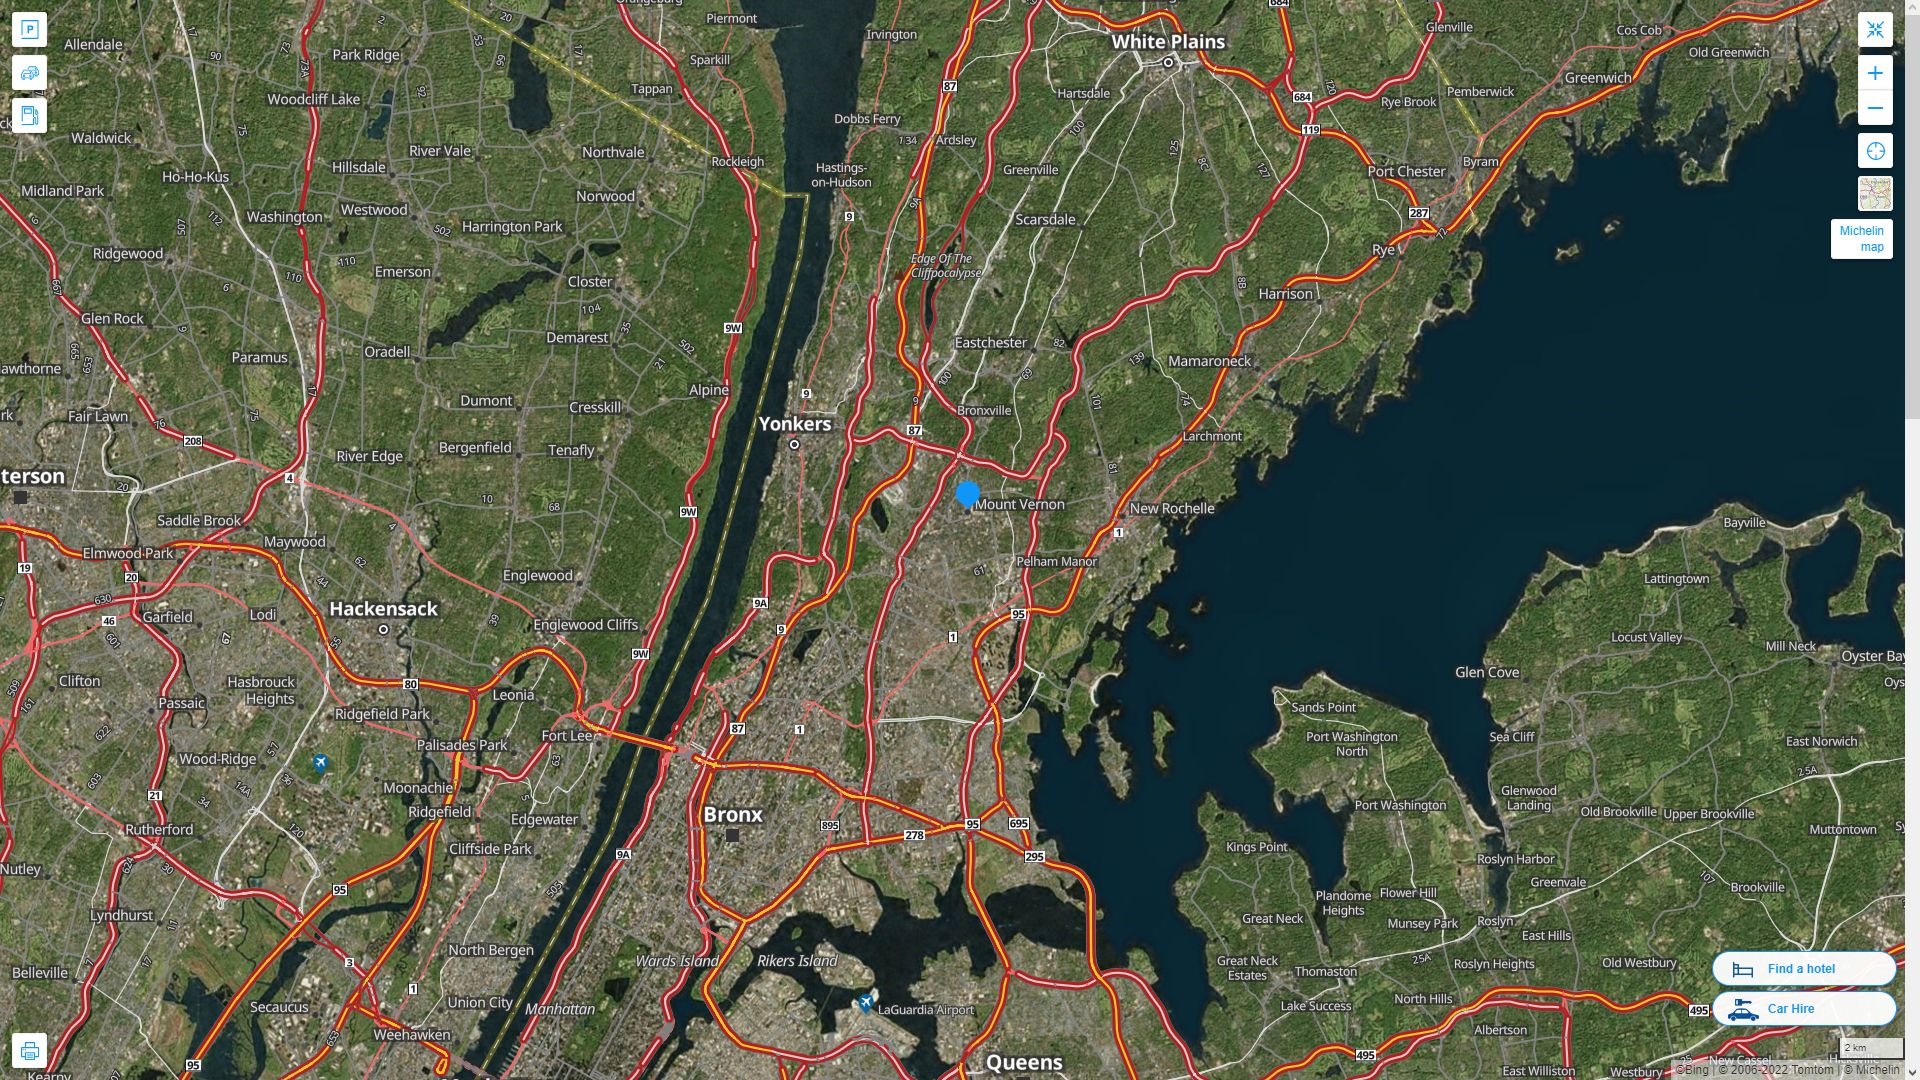 Mount Vernon New York Highway and Road Map with Satellite View